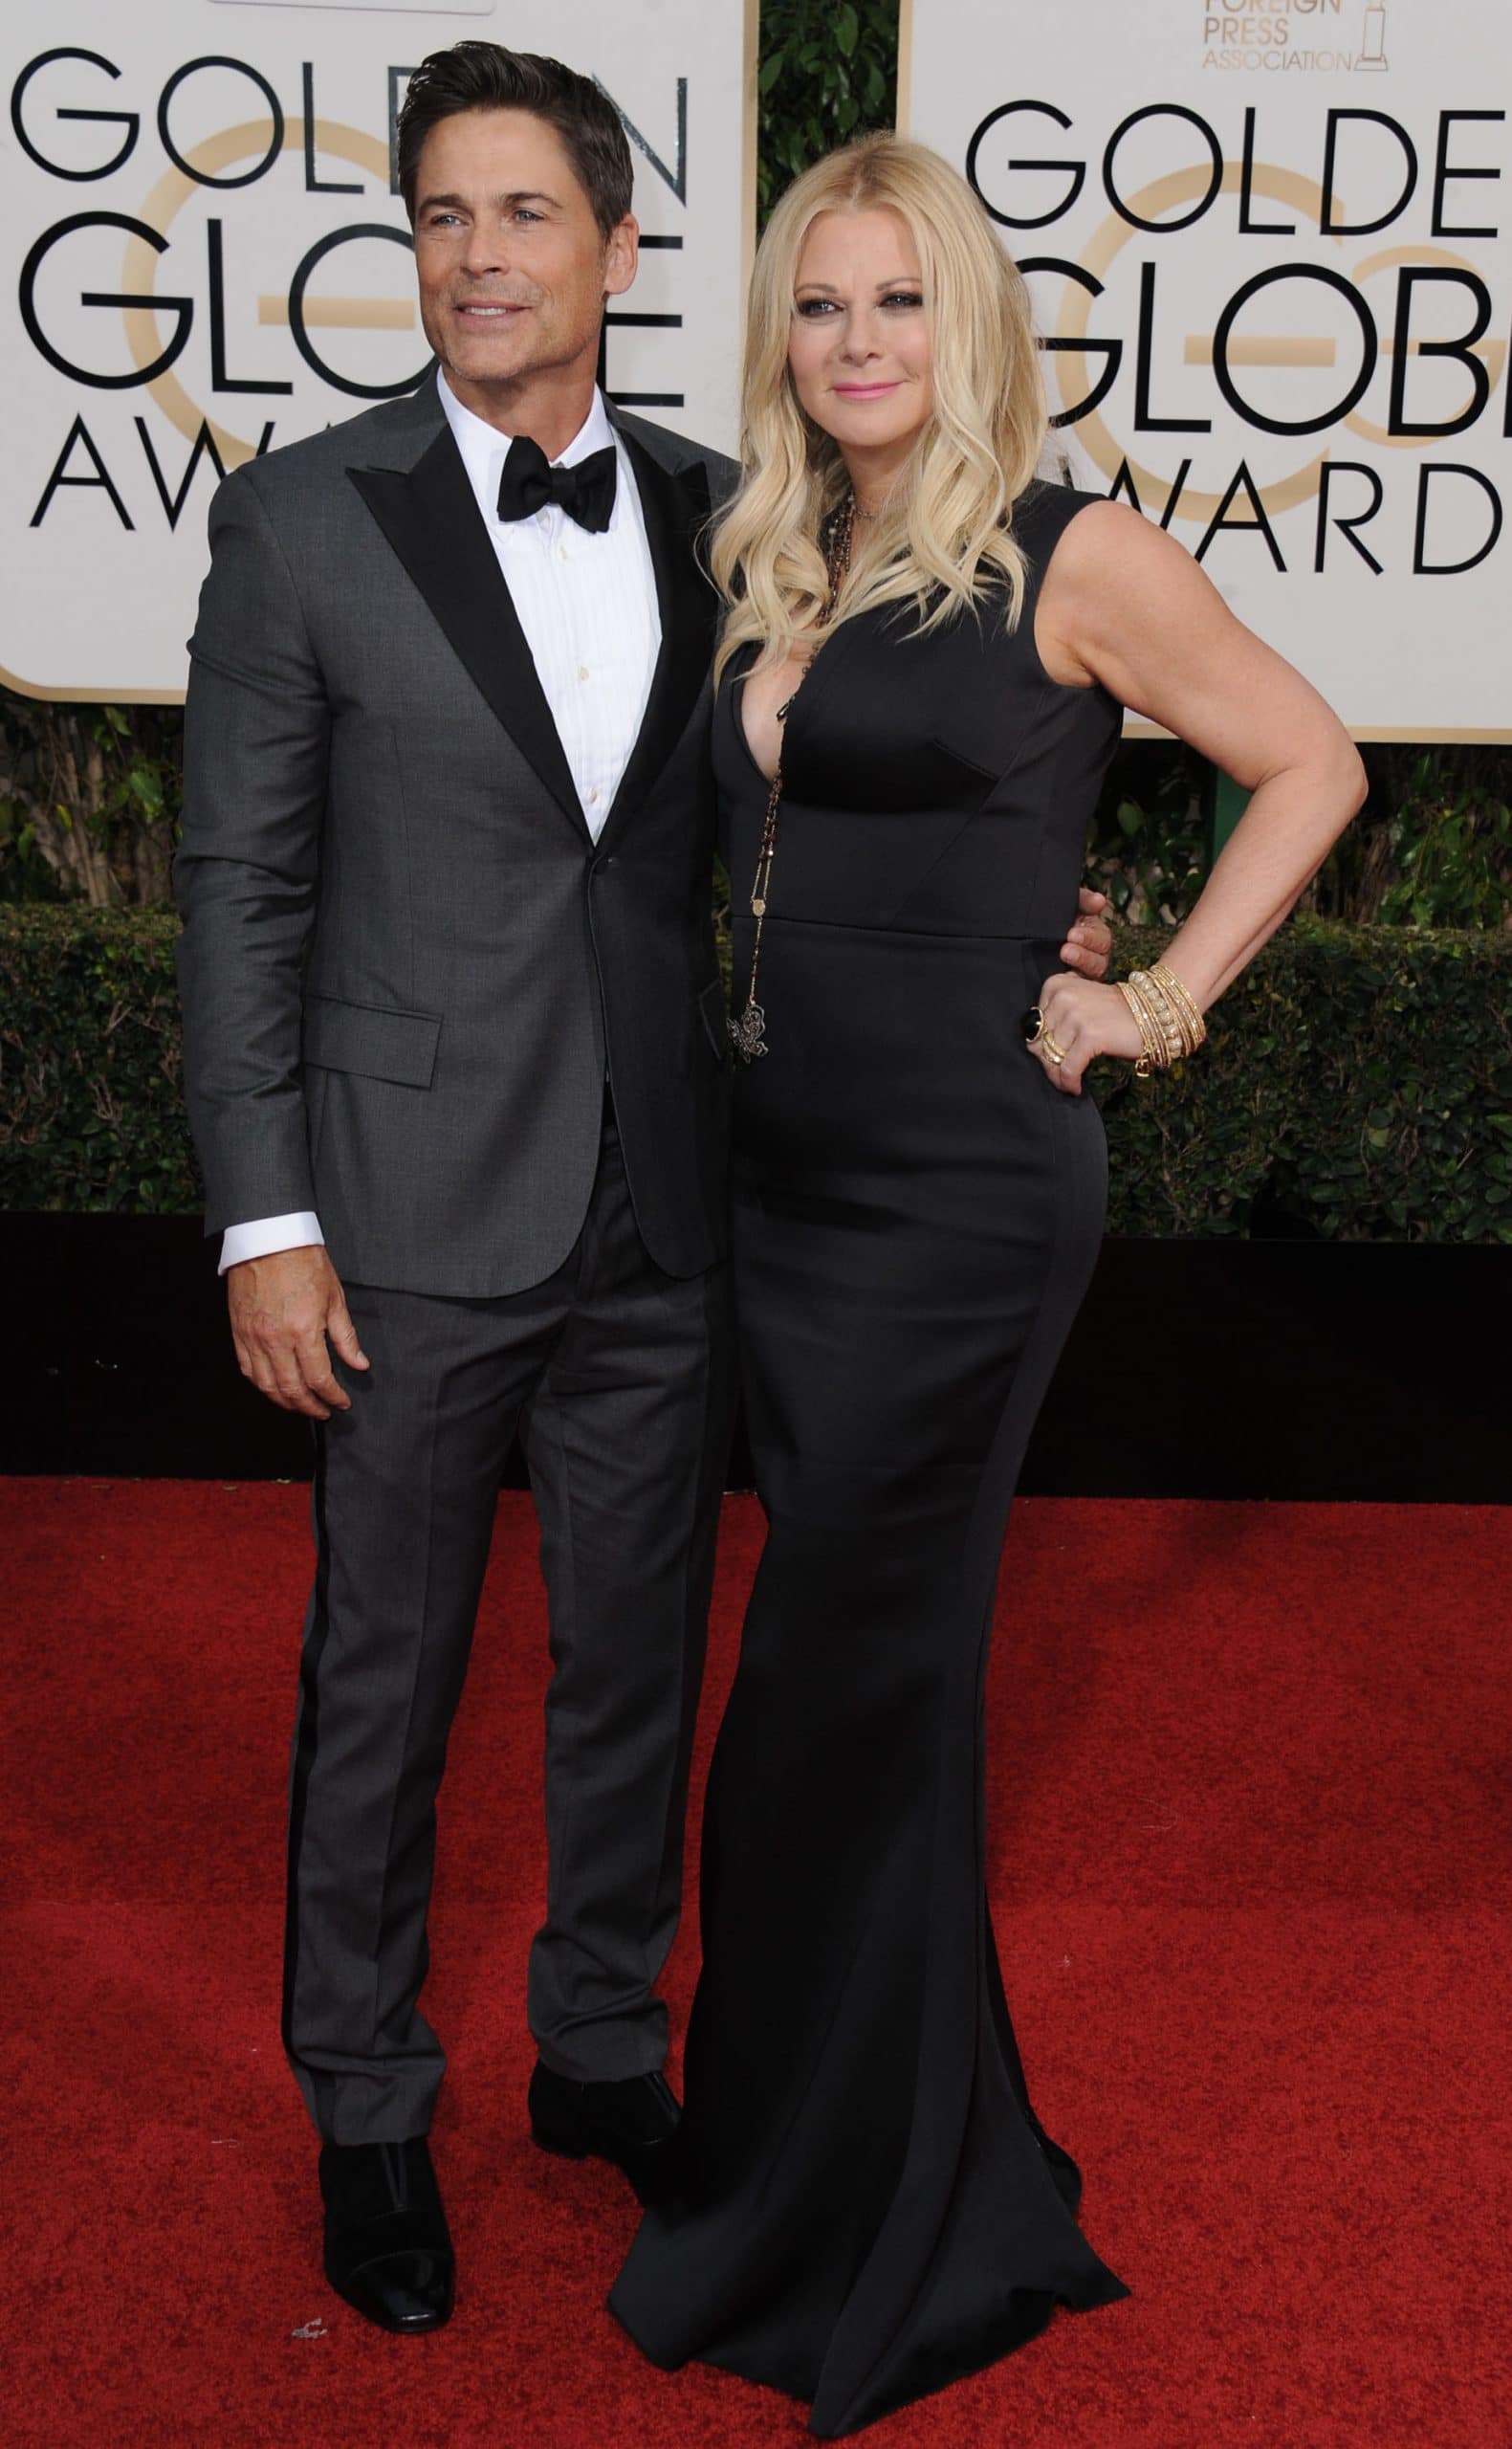 Rob Lowe and Sheryl Berkoff arriving at the 73rd Annual Golden Globe Awards